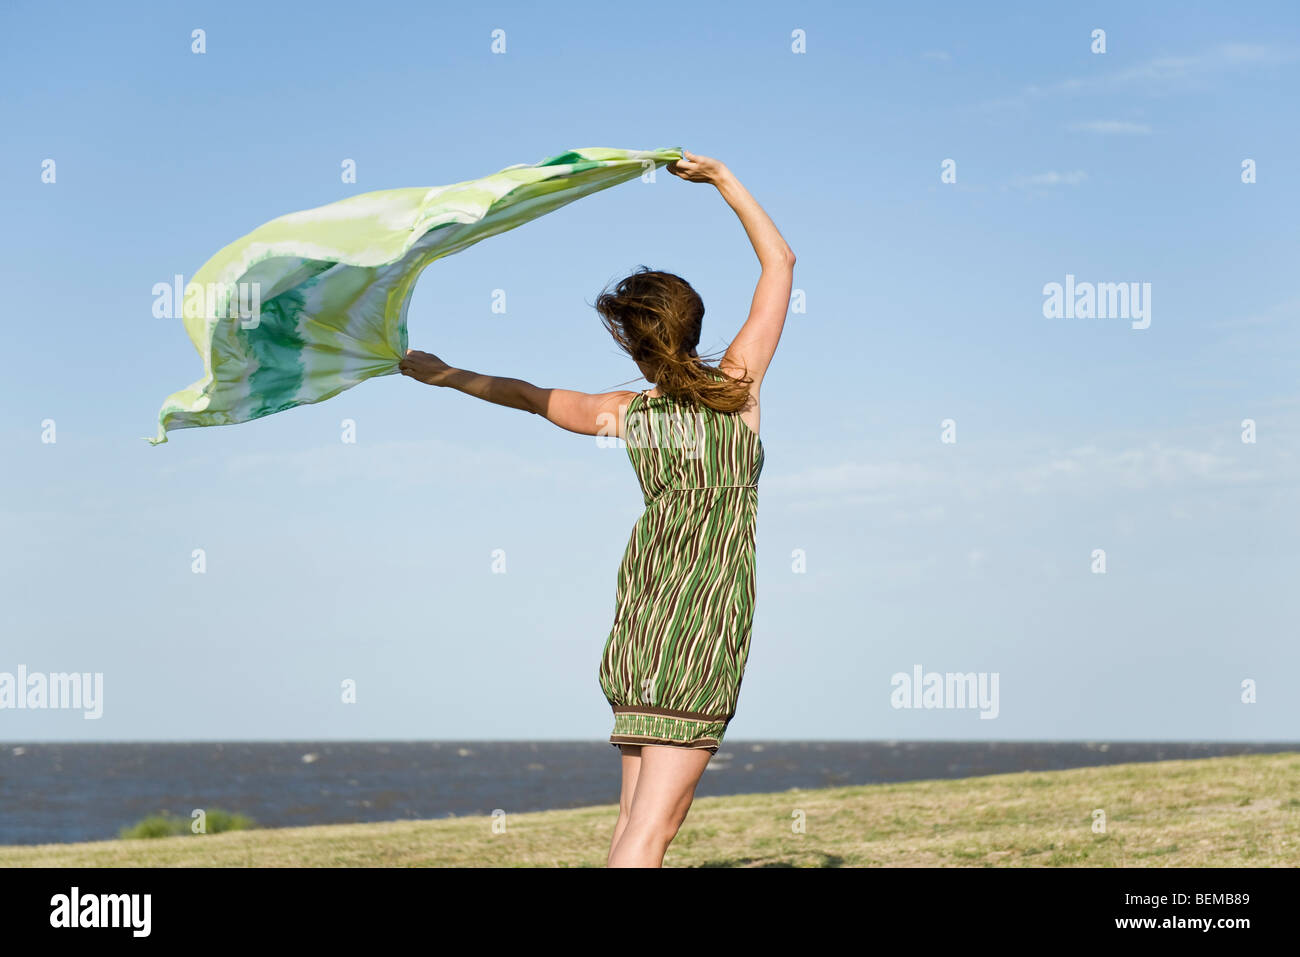 Woman standing outdoors, holding up shawl in wind, full length Stock Photo